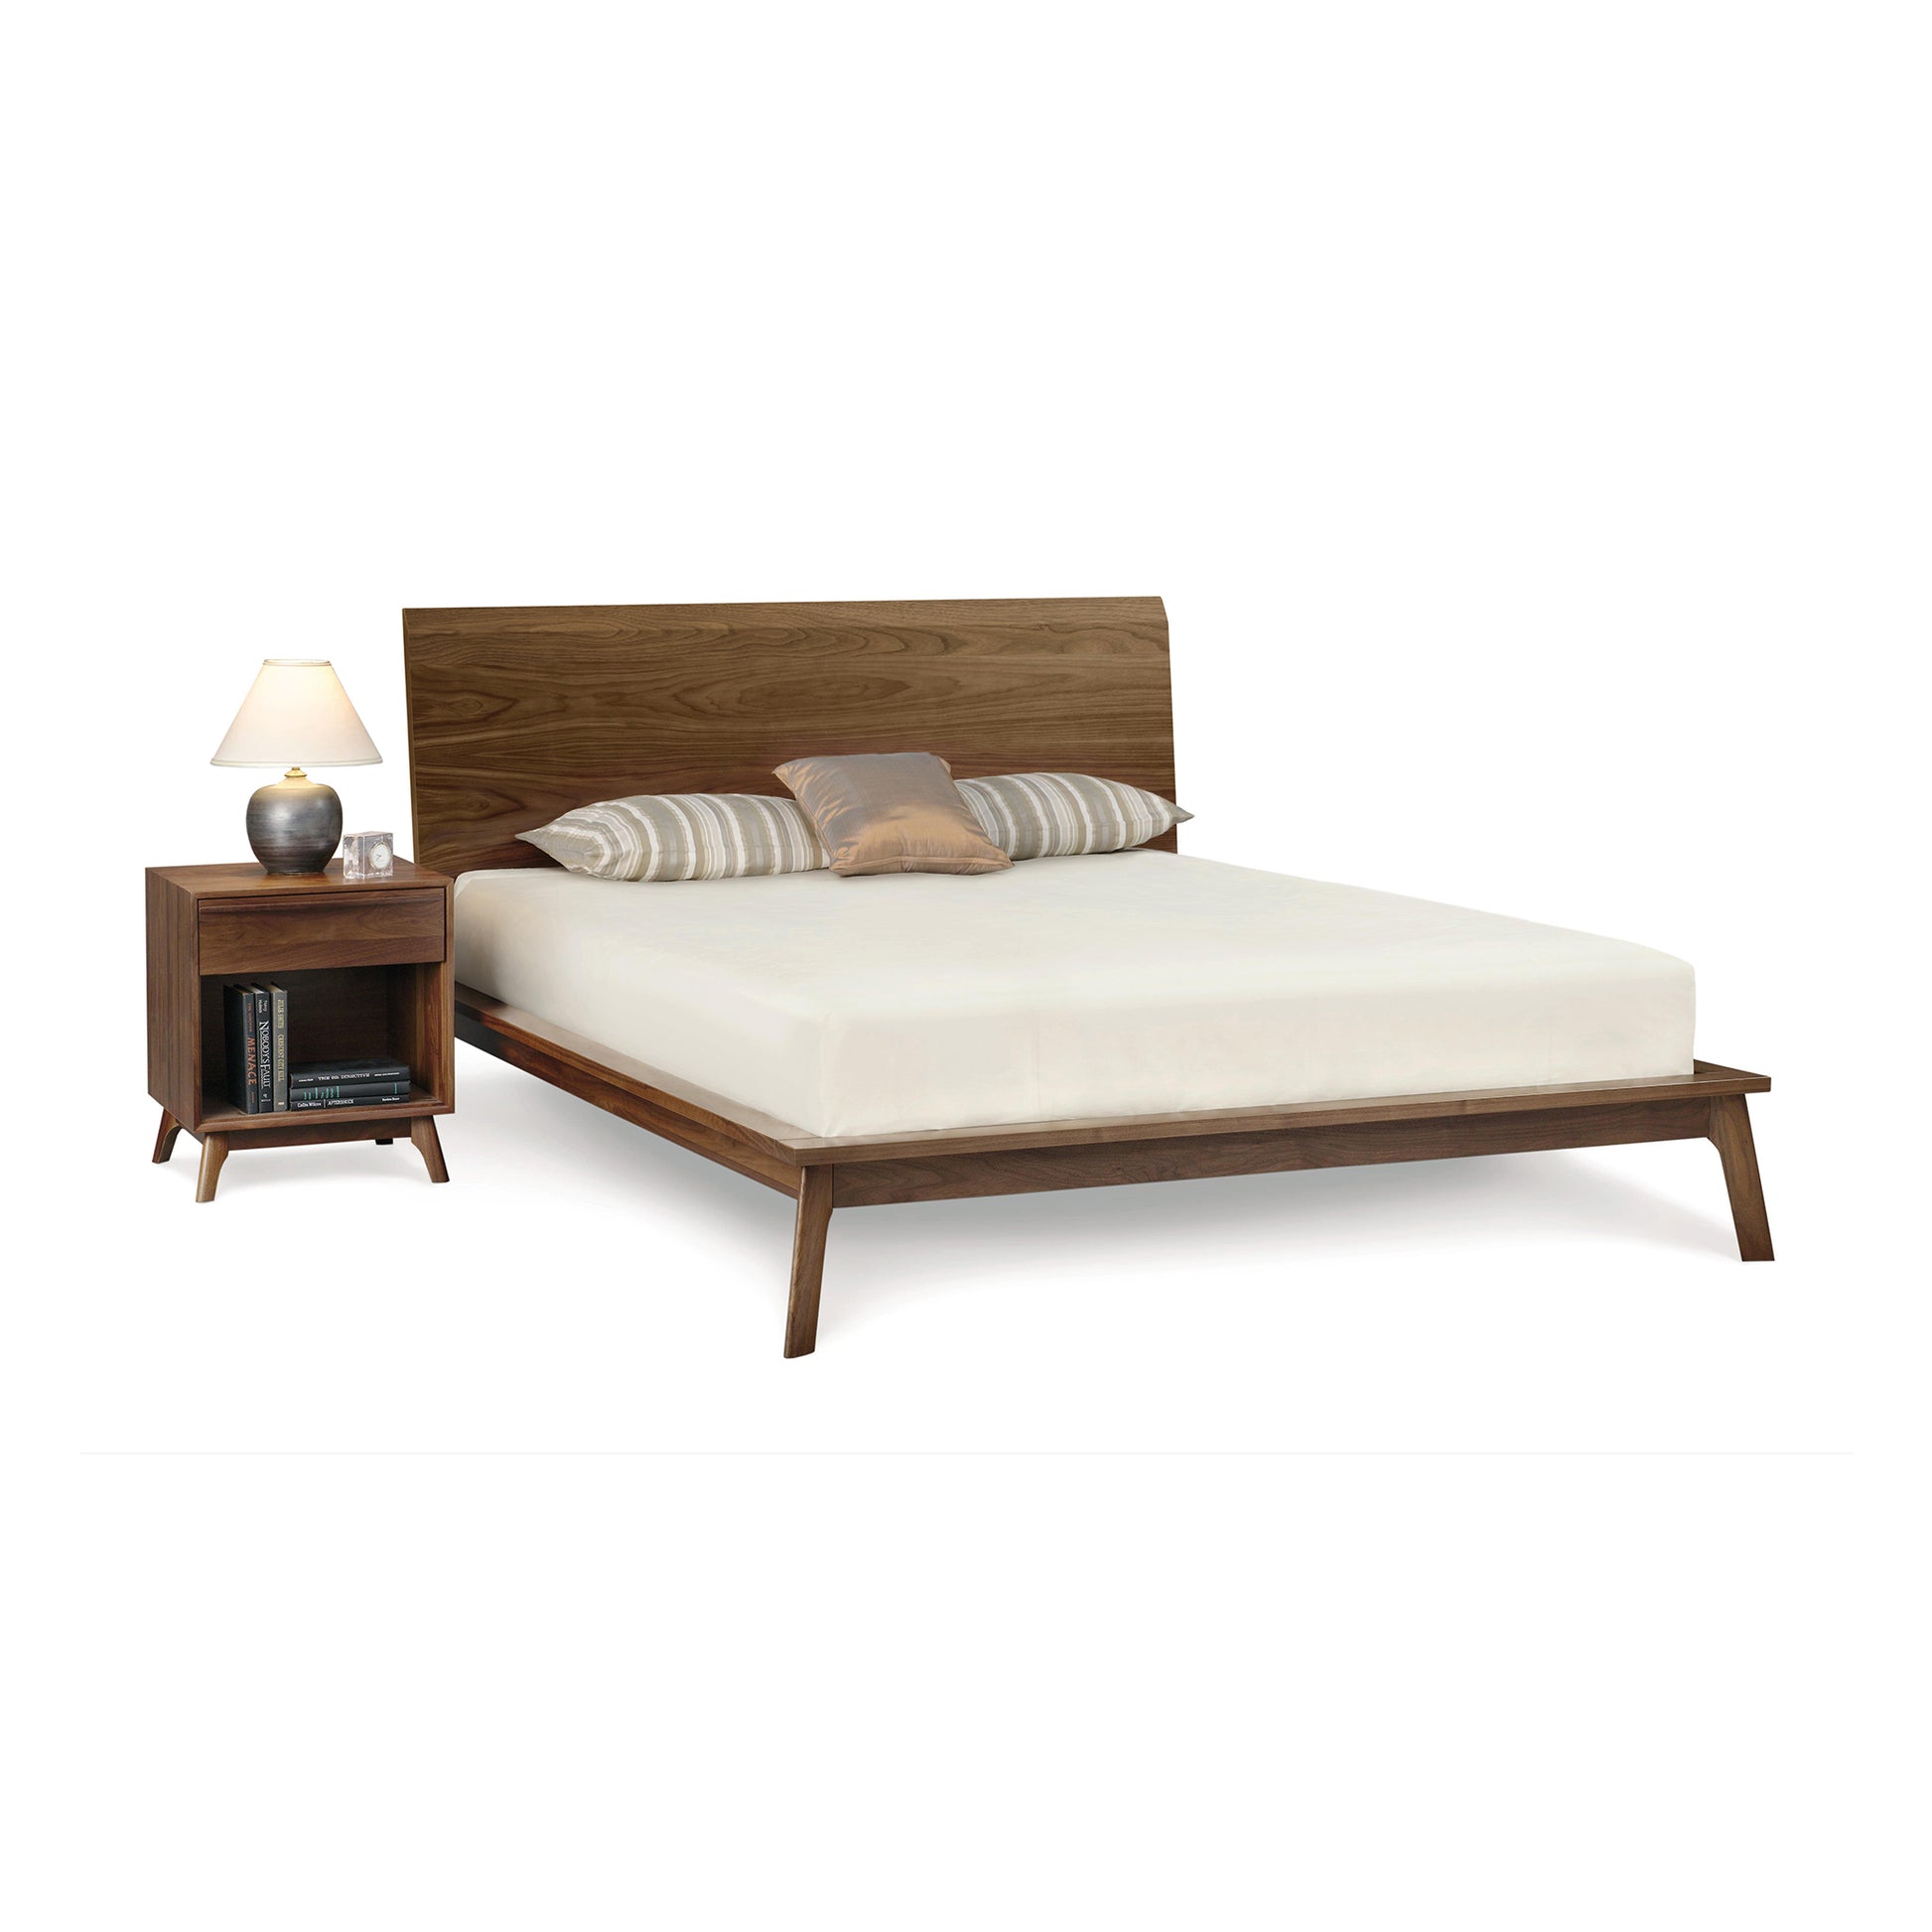 A modern American black walnut wood Copeland Furniture Catalina platform bed with matching nightstand and a lamp, set against a white background.